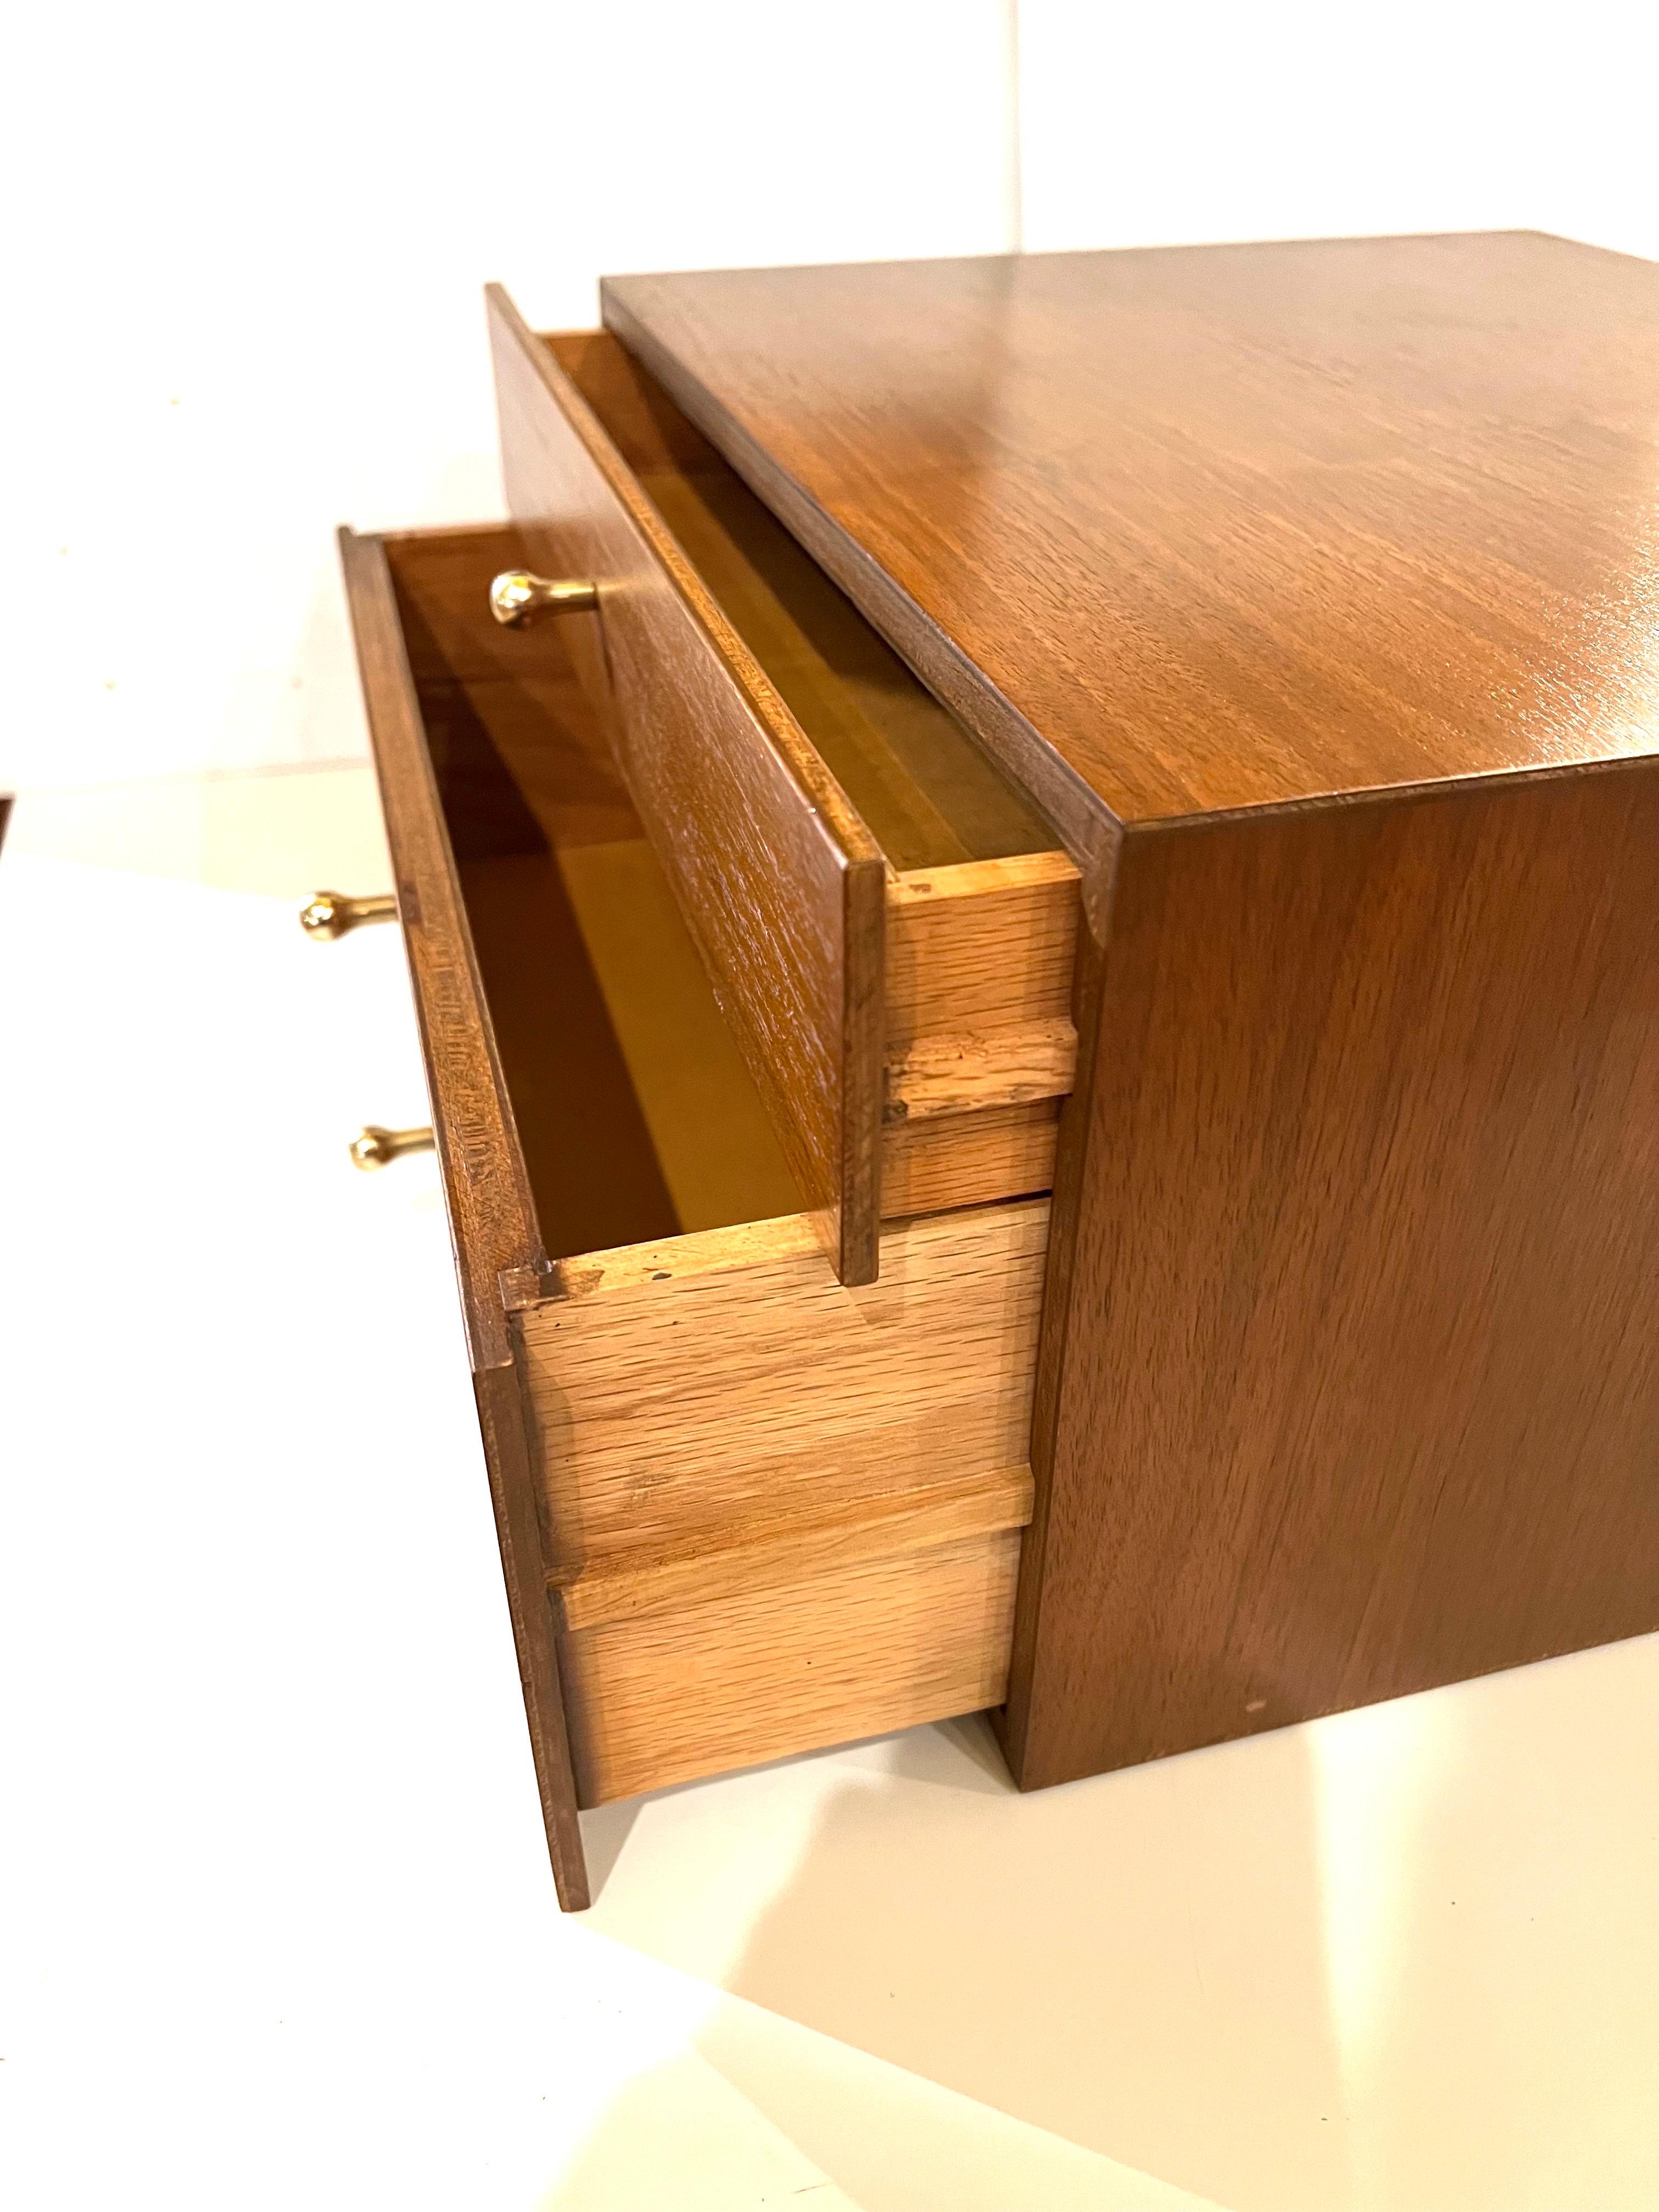 American Petite & Rare Jewelry Chest by Arthur Umanoff in Walnut & Brass Midcentury For Sale